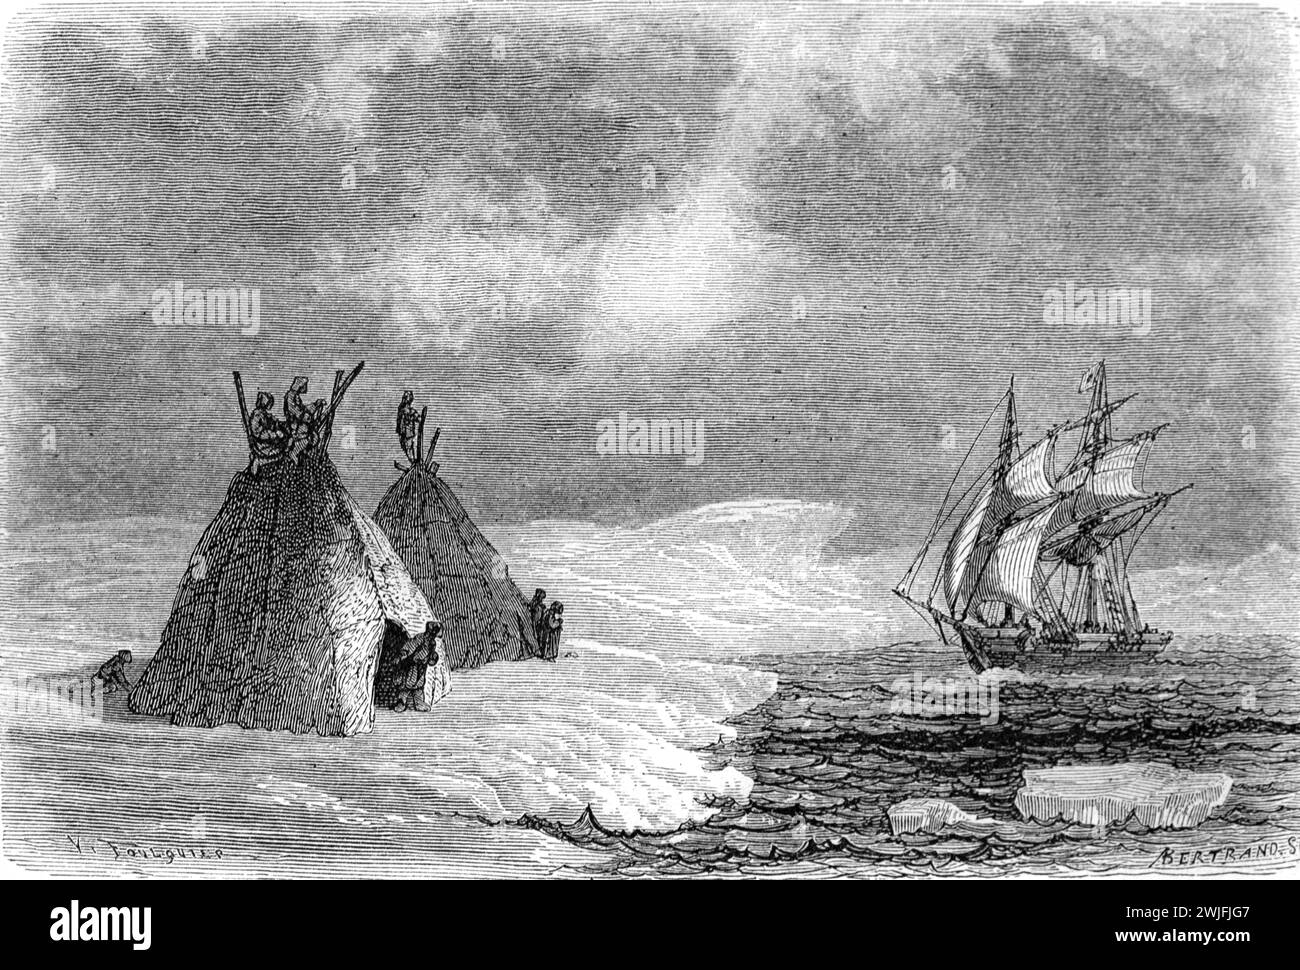 Nenets or Samoyeds and Nenet Huts on Vaygach Island, a Russia Island in the Arctic Sea, Arctic Russia or Russian Far North, Russia. Vintage or Historic Engraving or Illustration 1863 Stock Photo